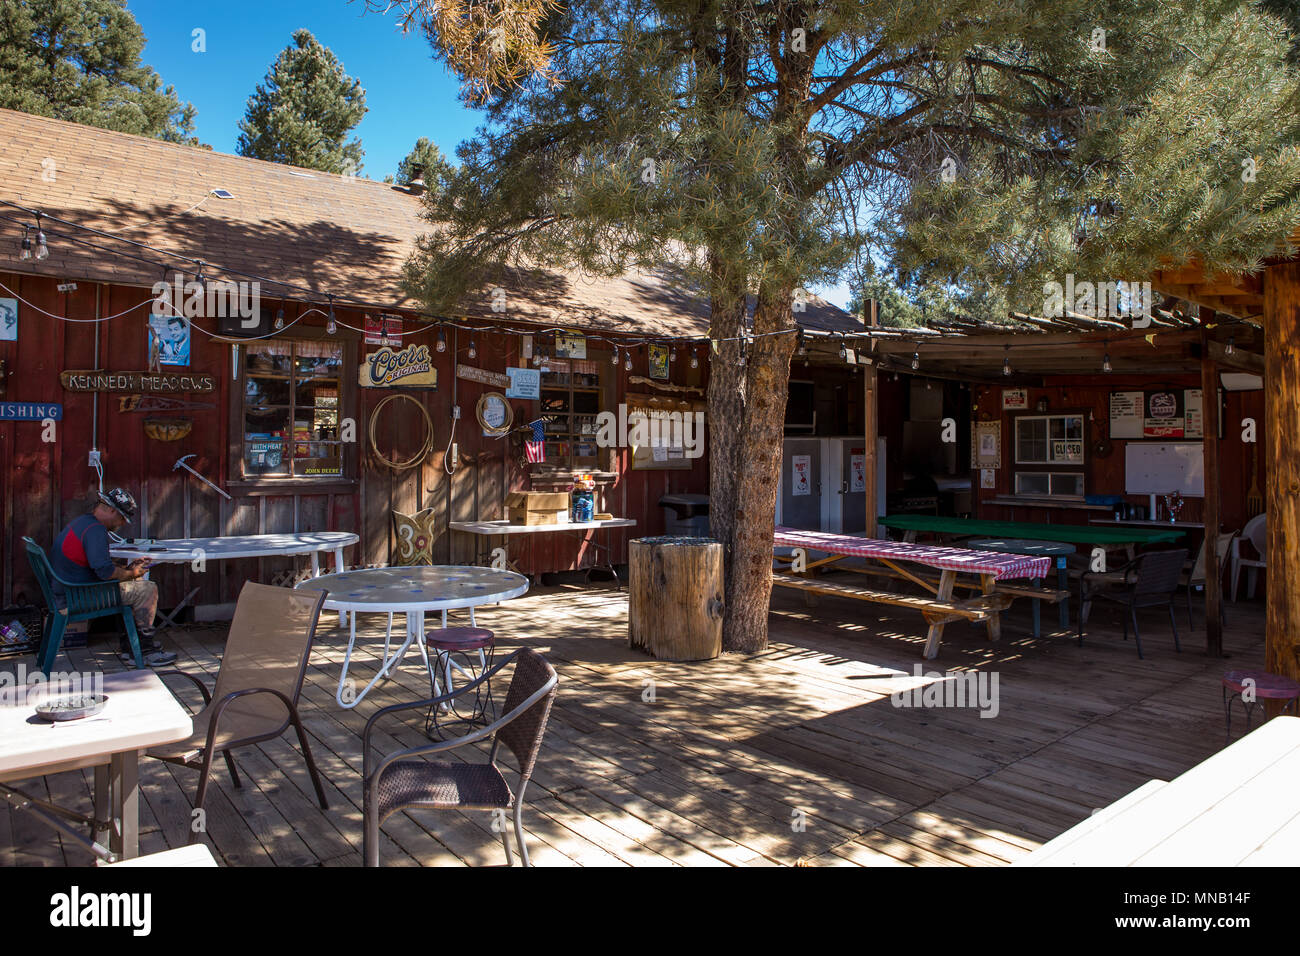 The exterior of the old wooden General Store in Kennedy meadows. Located on the Pacific Crest Trail near the South Fork of the Kern River,California Stock Photo